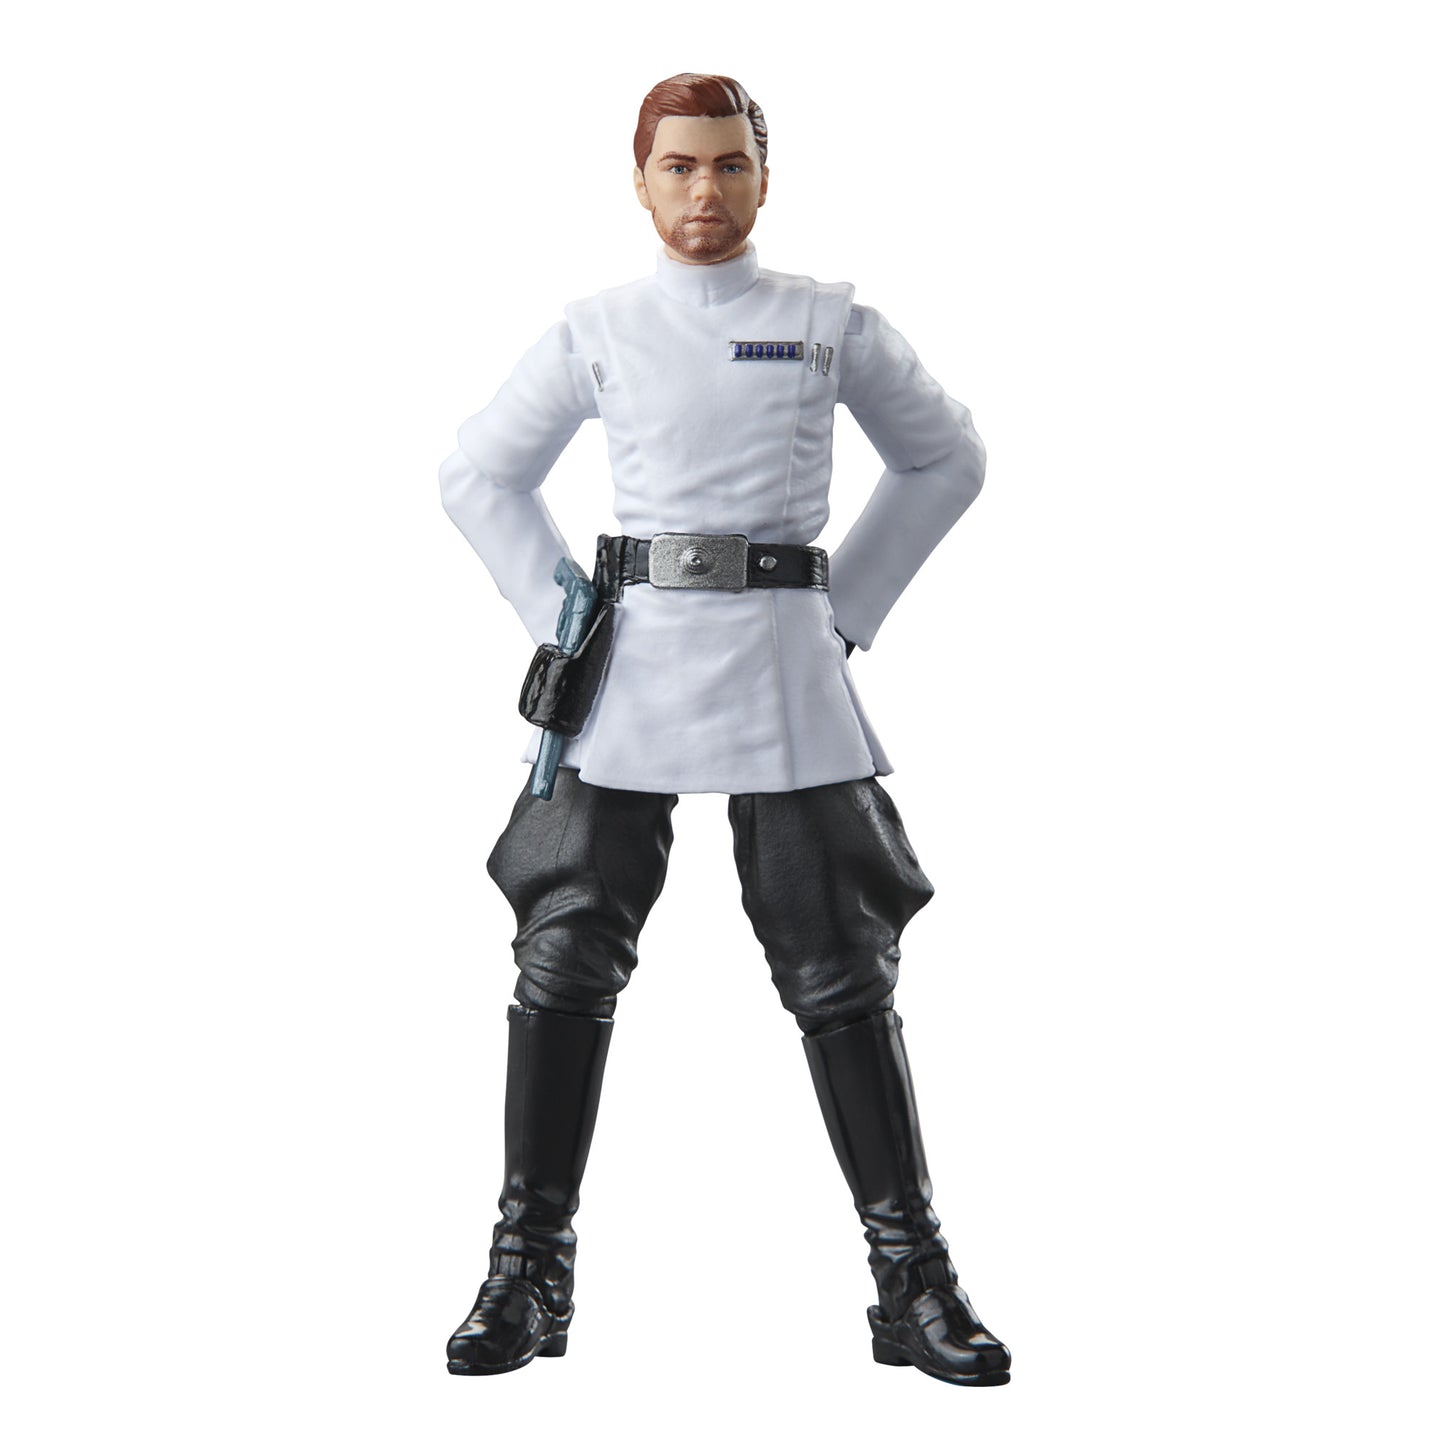 Star Wars The Vintage Collection Cal Kestis (Imperial Officer Disguise), Star Wars Jedi: Survivor 3.75 Inch Collectible Action Figure